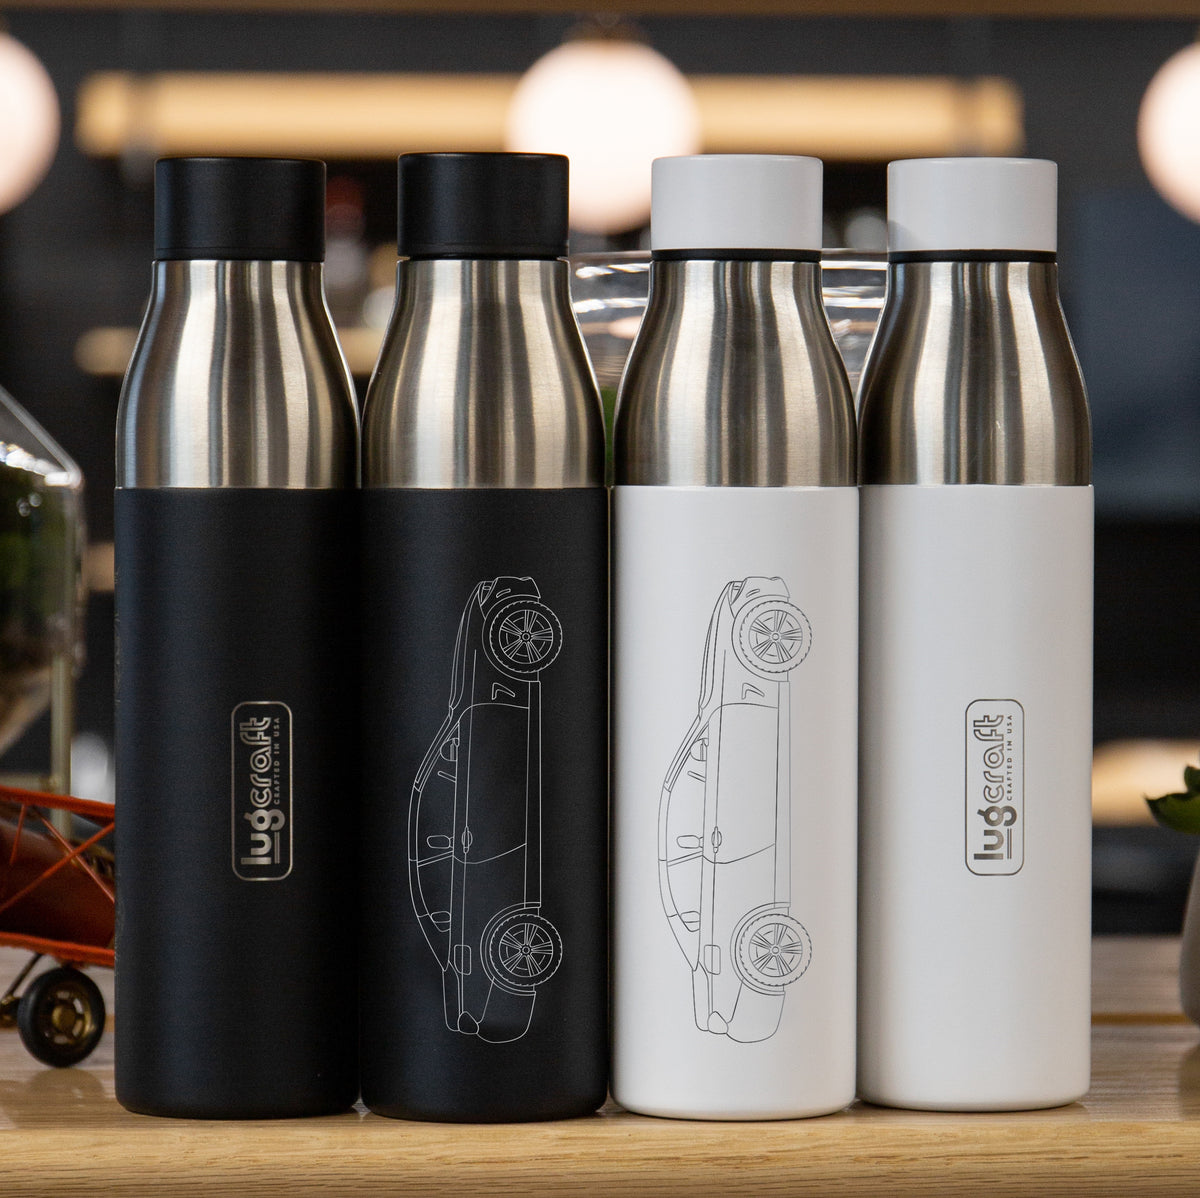 BMW 435i Insulated Stainless Steel Water Bottle - 21 oz